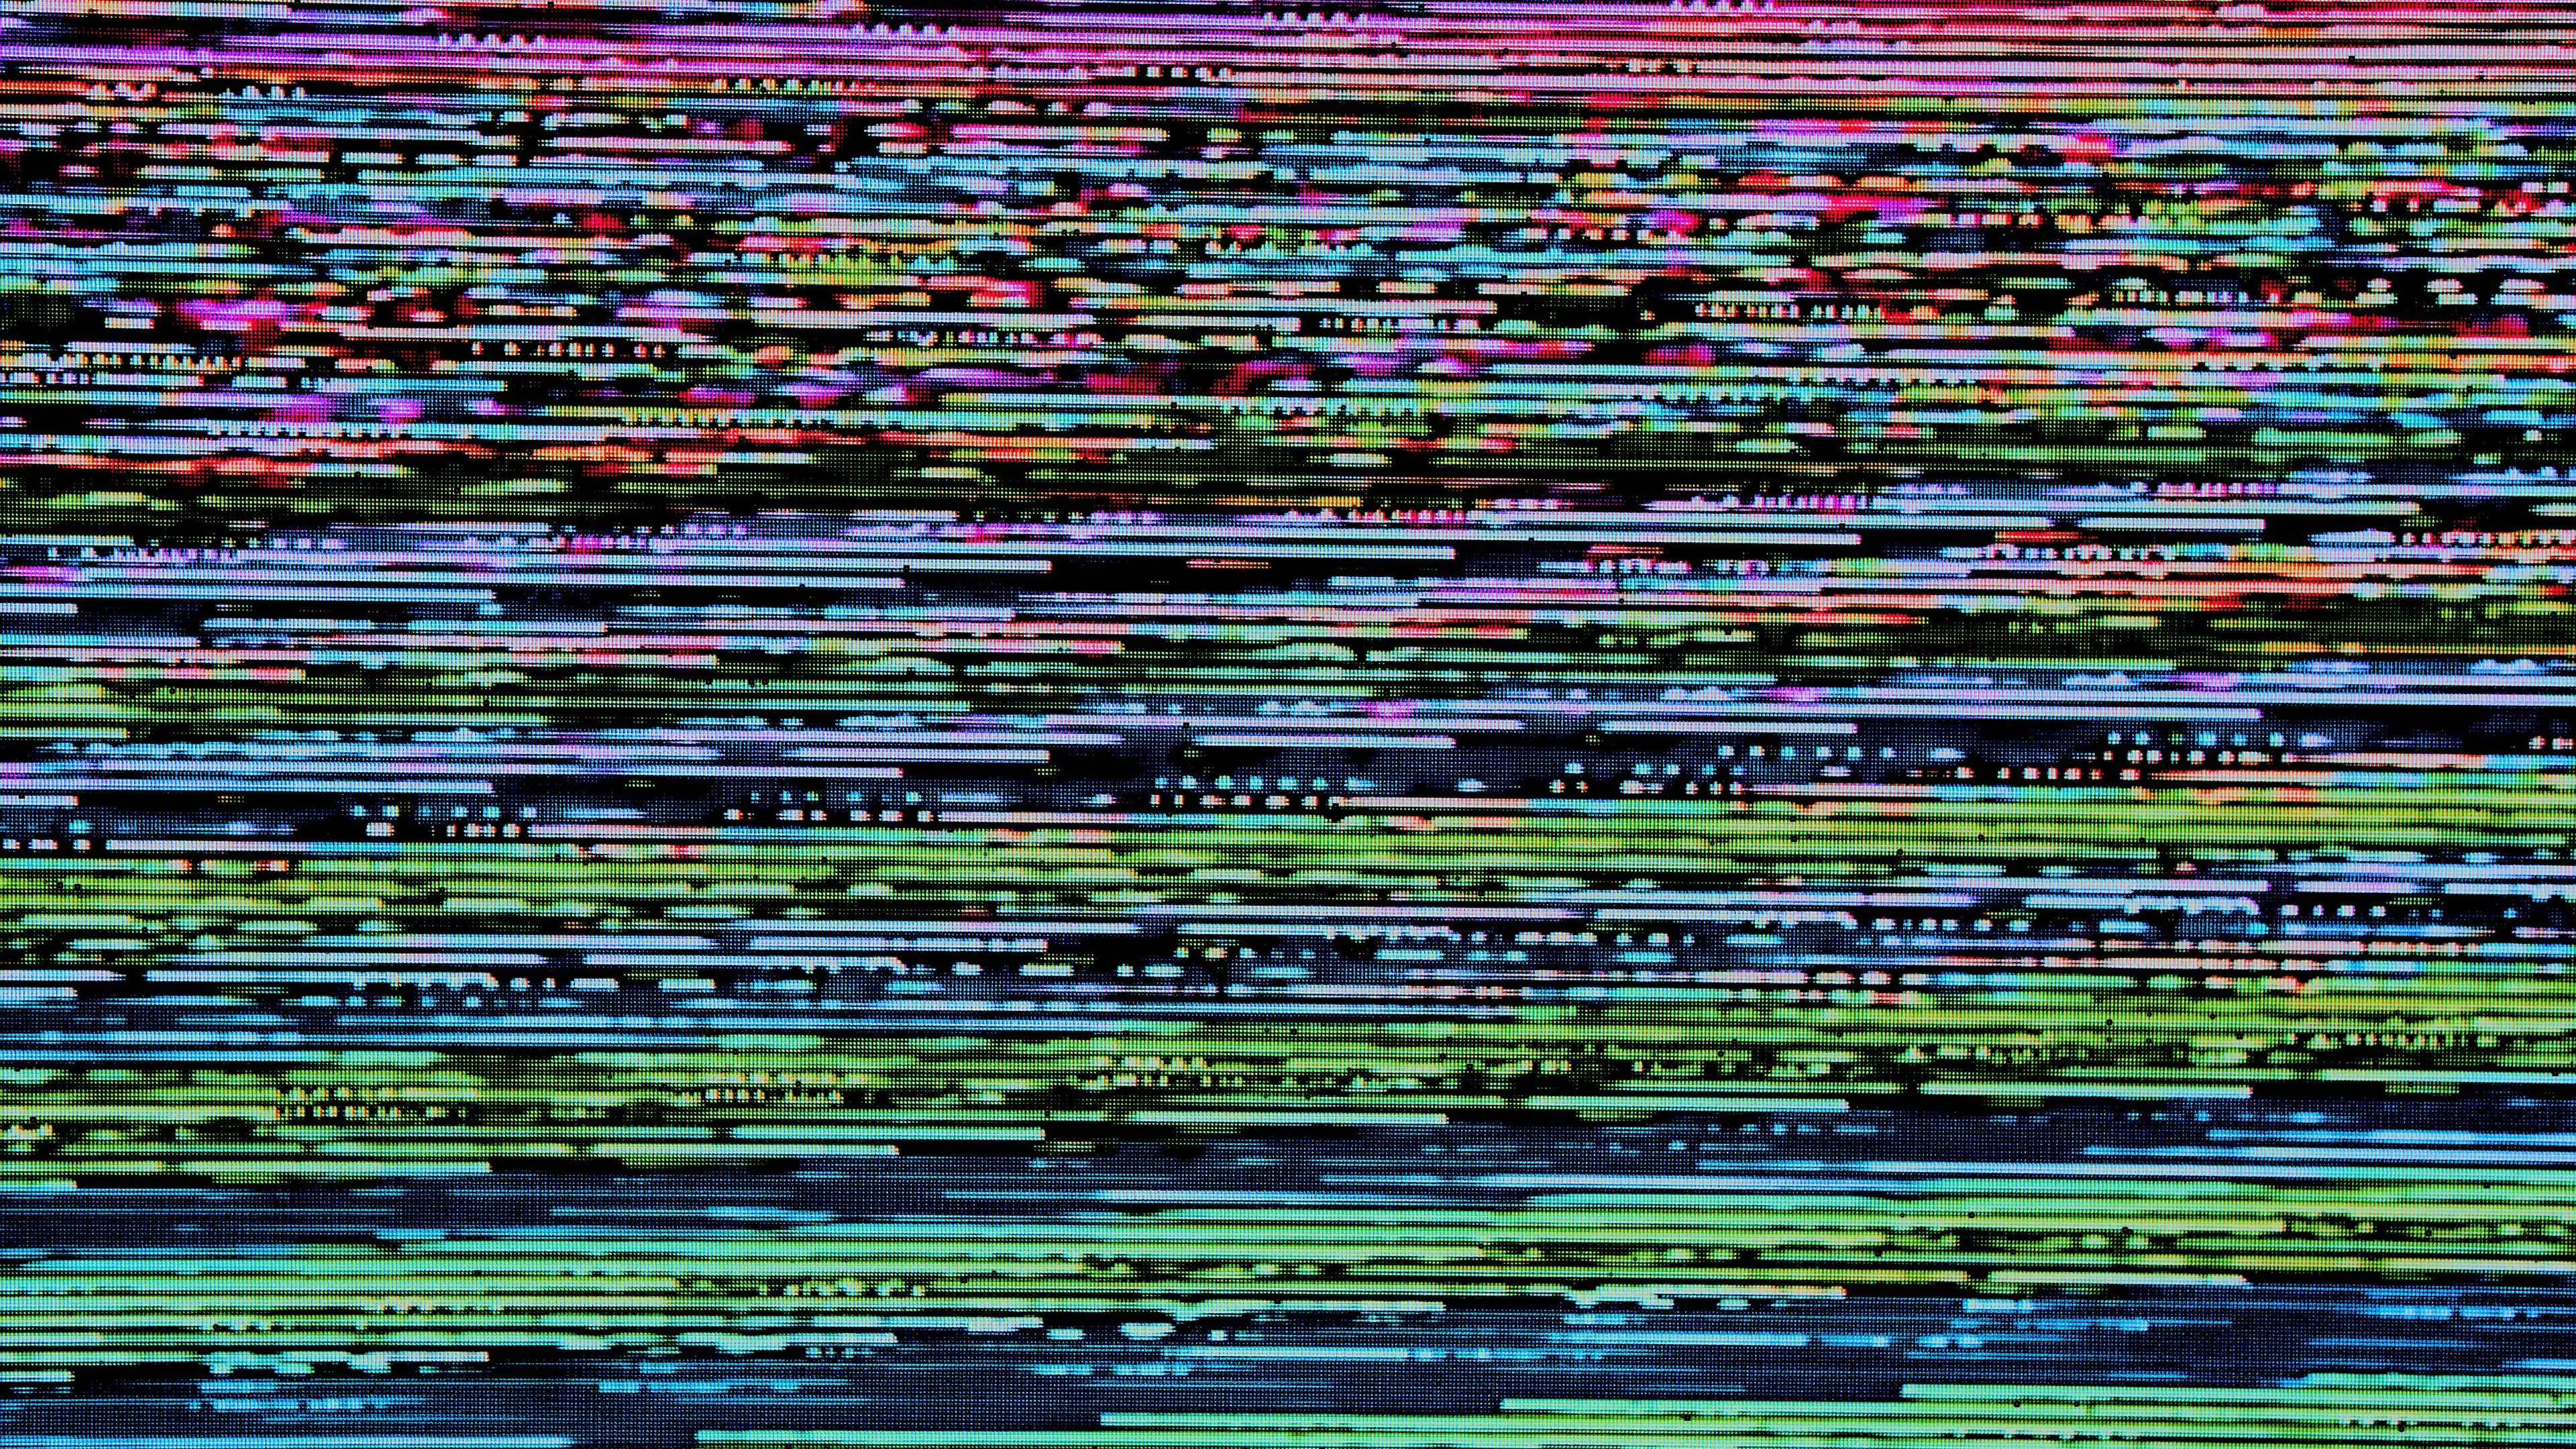 ripples distortion glitch interference digital noise 4k 1691686546